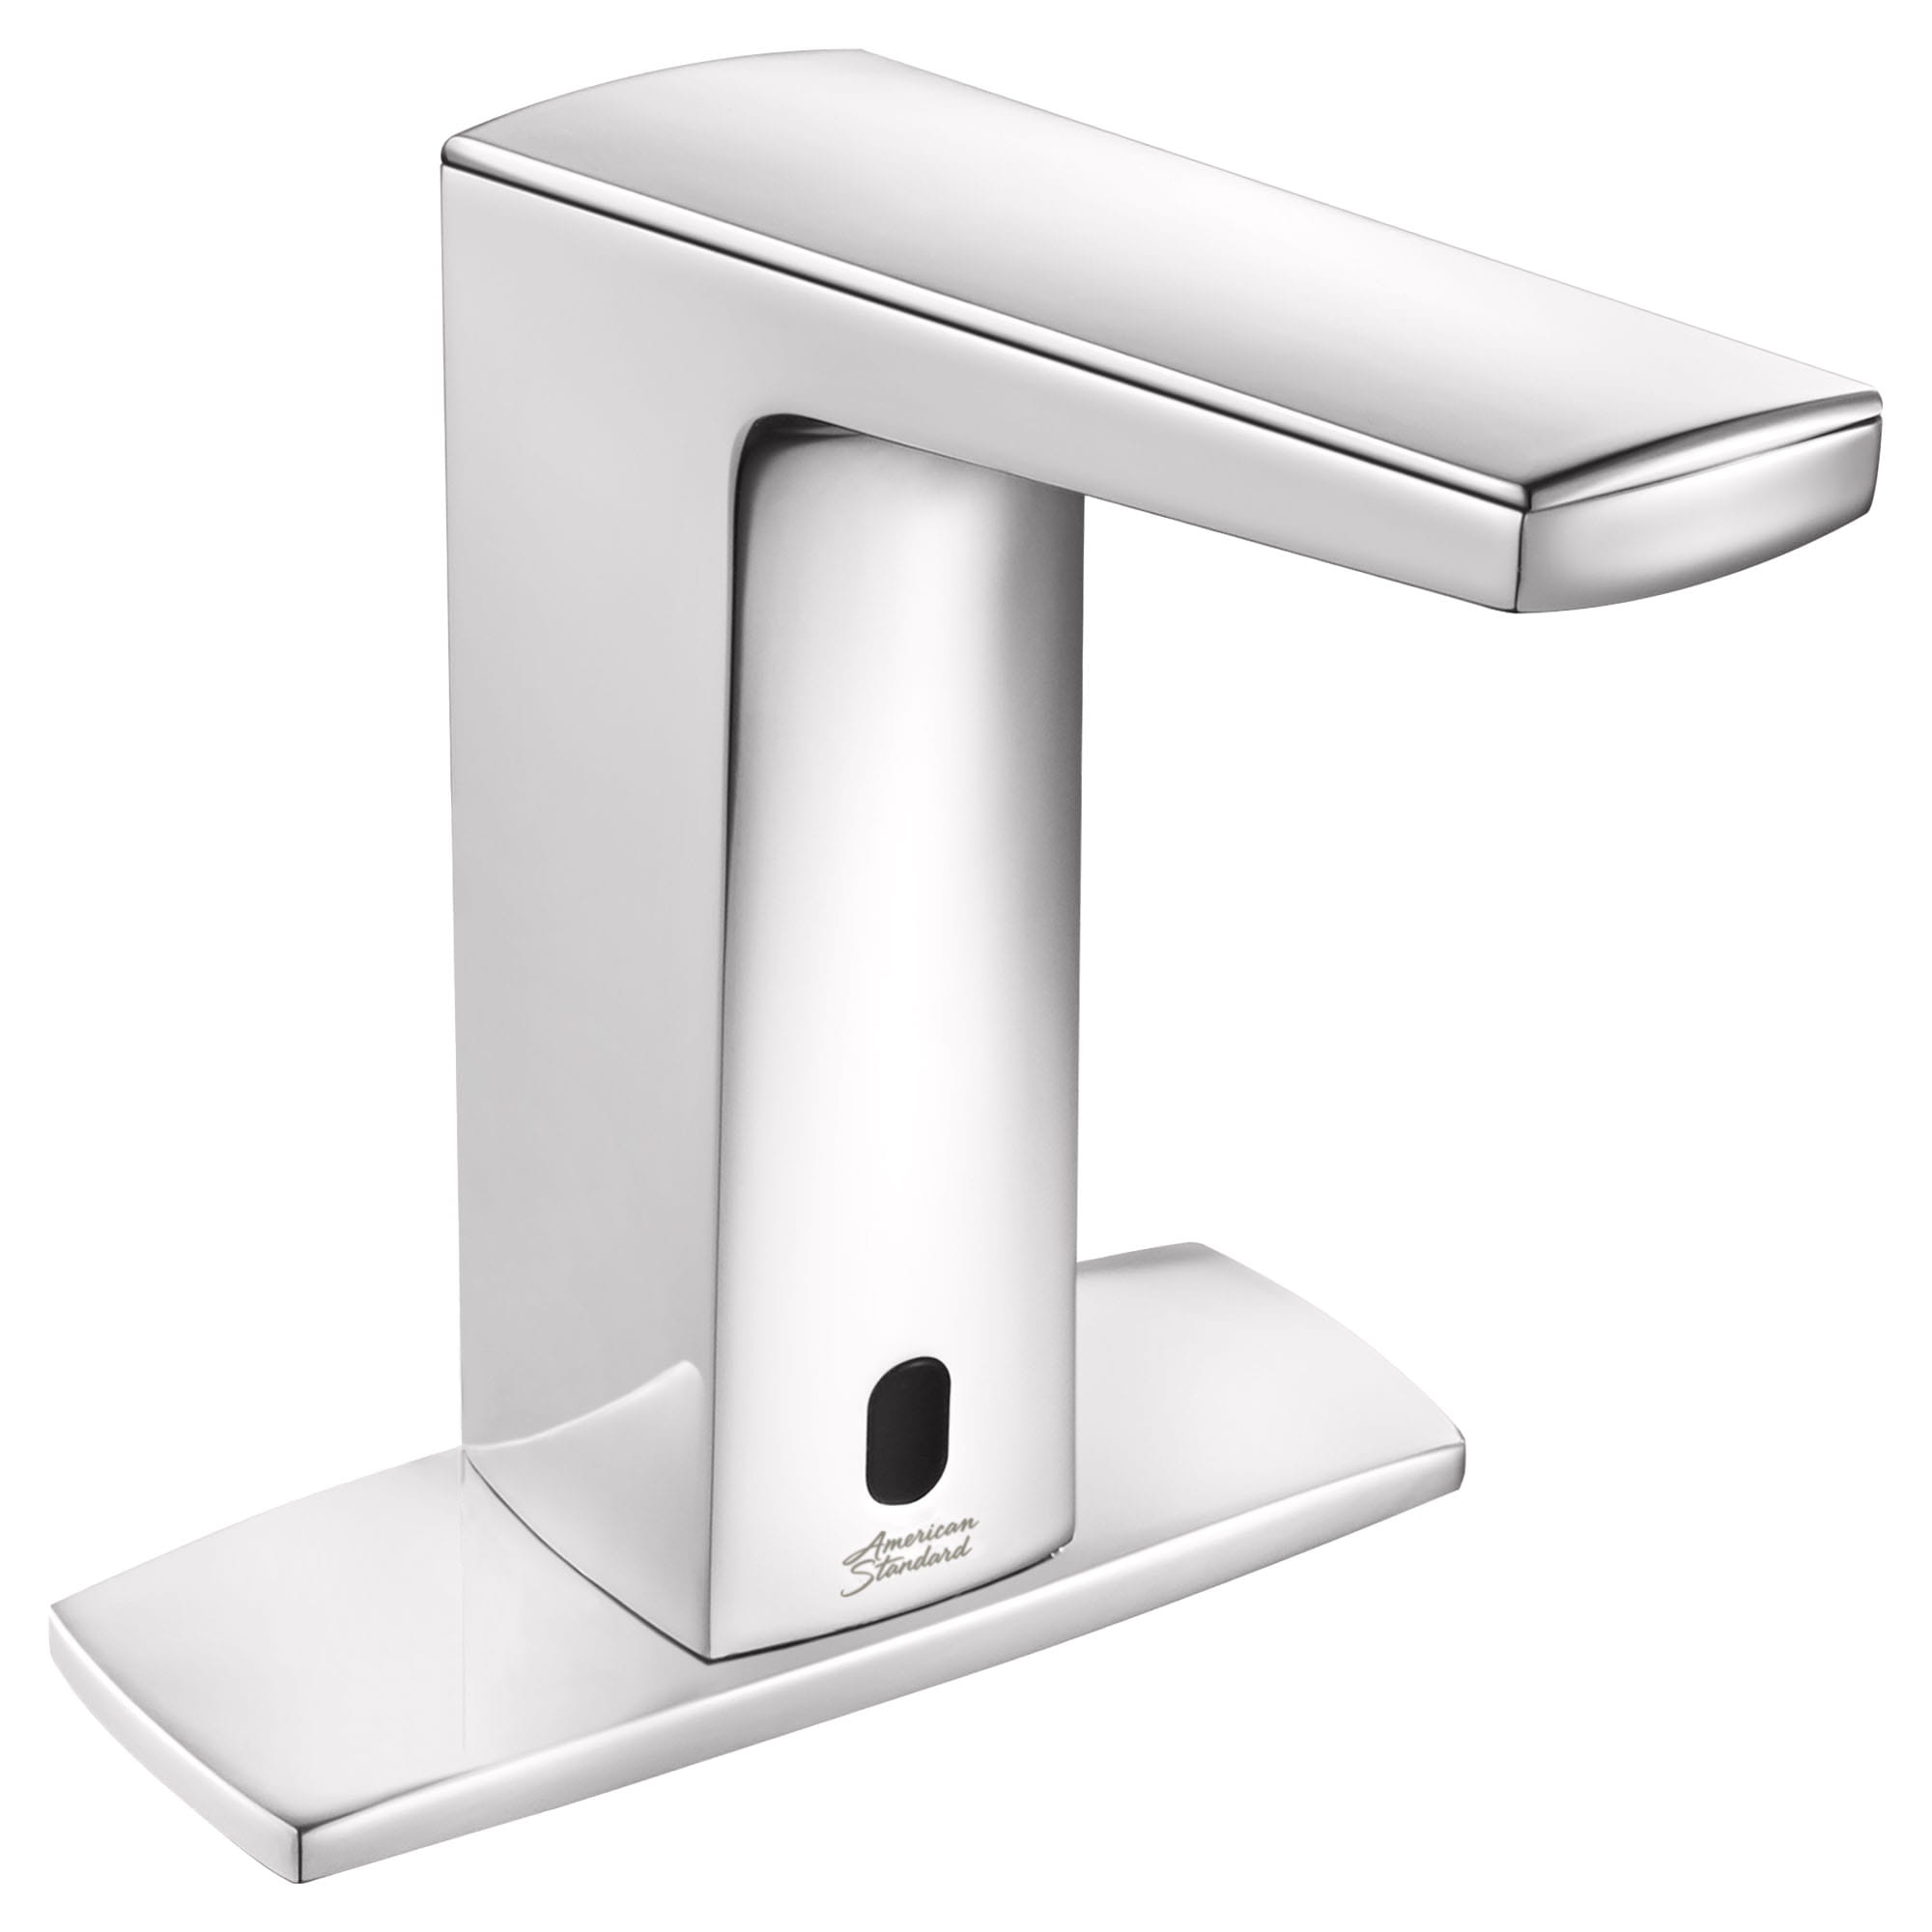 Paradigm® Selectronic® Touchless Faucet, Base Model With SmarTherm Safety Shut-Off + ADM, 0.5 gpm/1.9 Lpm